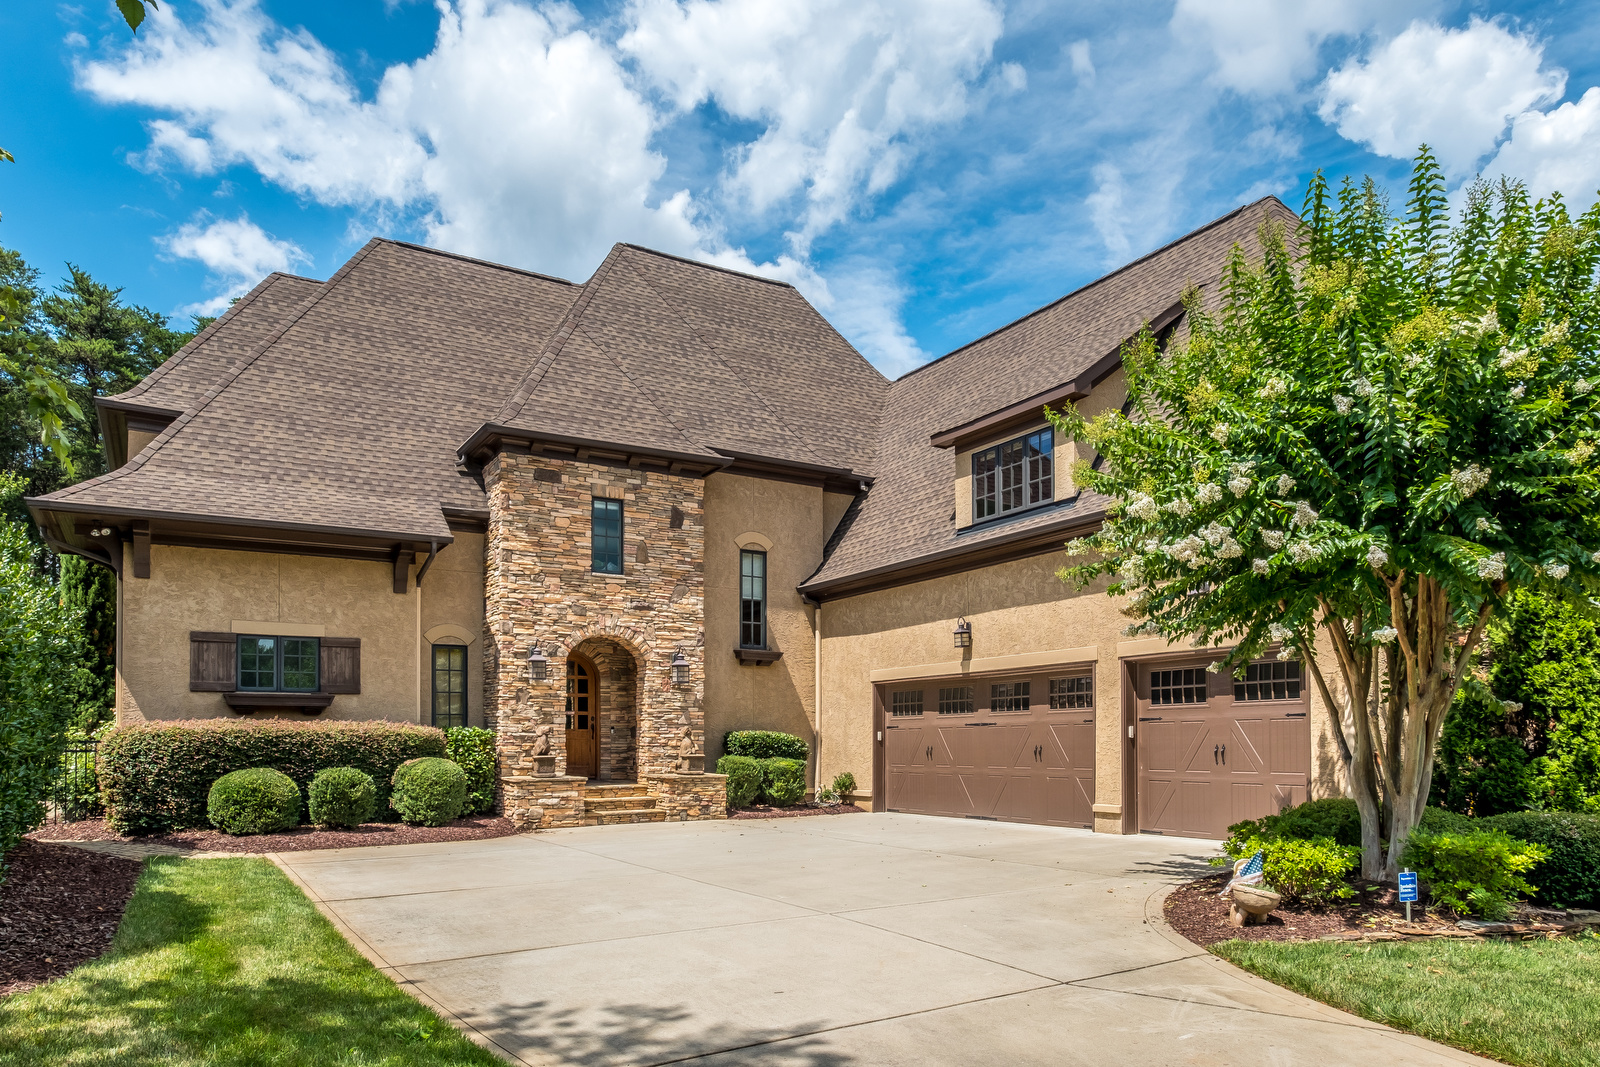 Large two story brown stone and stucco home with brown two car garage green front yard with manicured landscaping